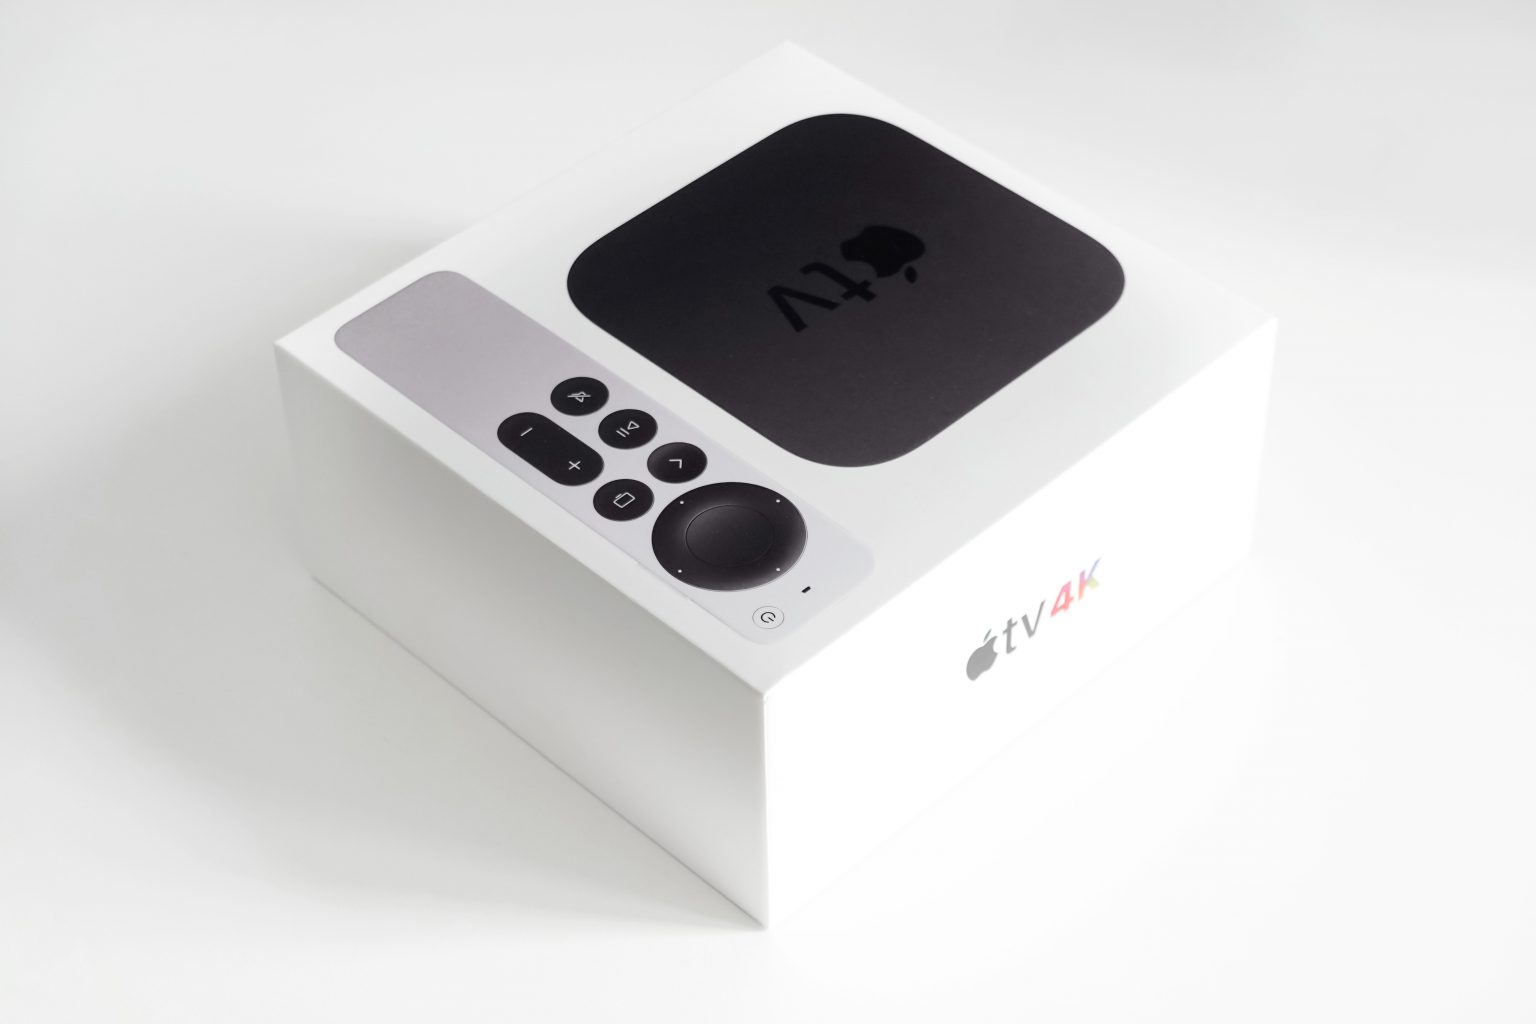 Apple TV Siri Remote sale: You don't need to buy the cow to get the milk. Or something.